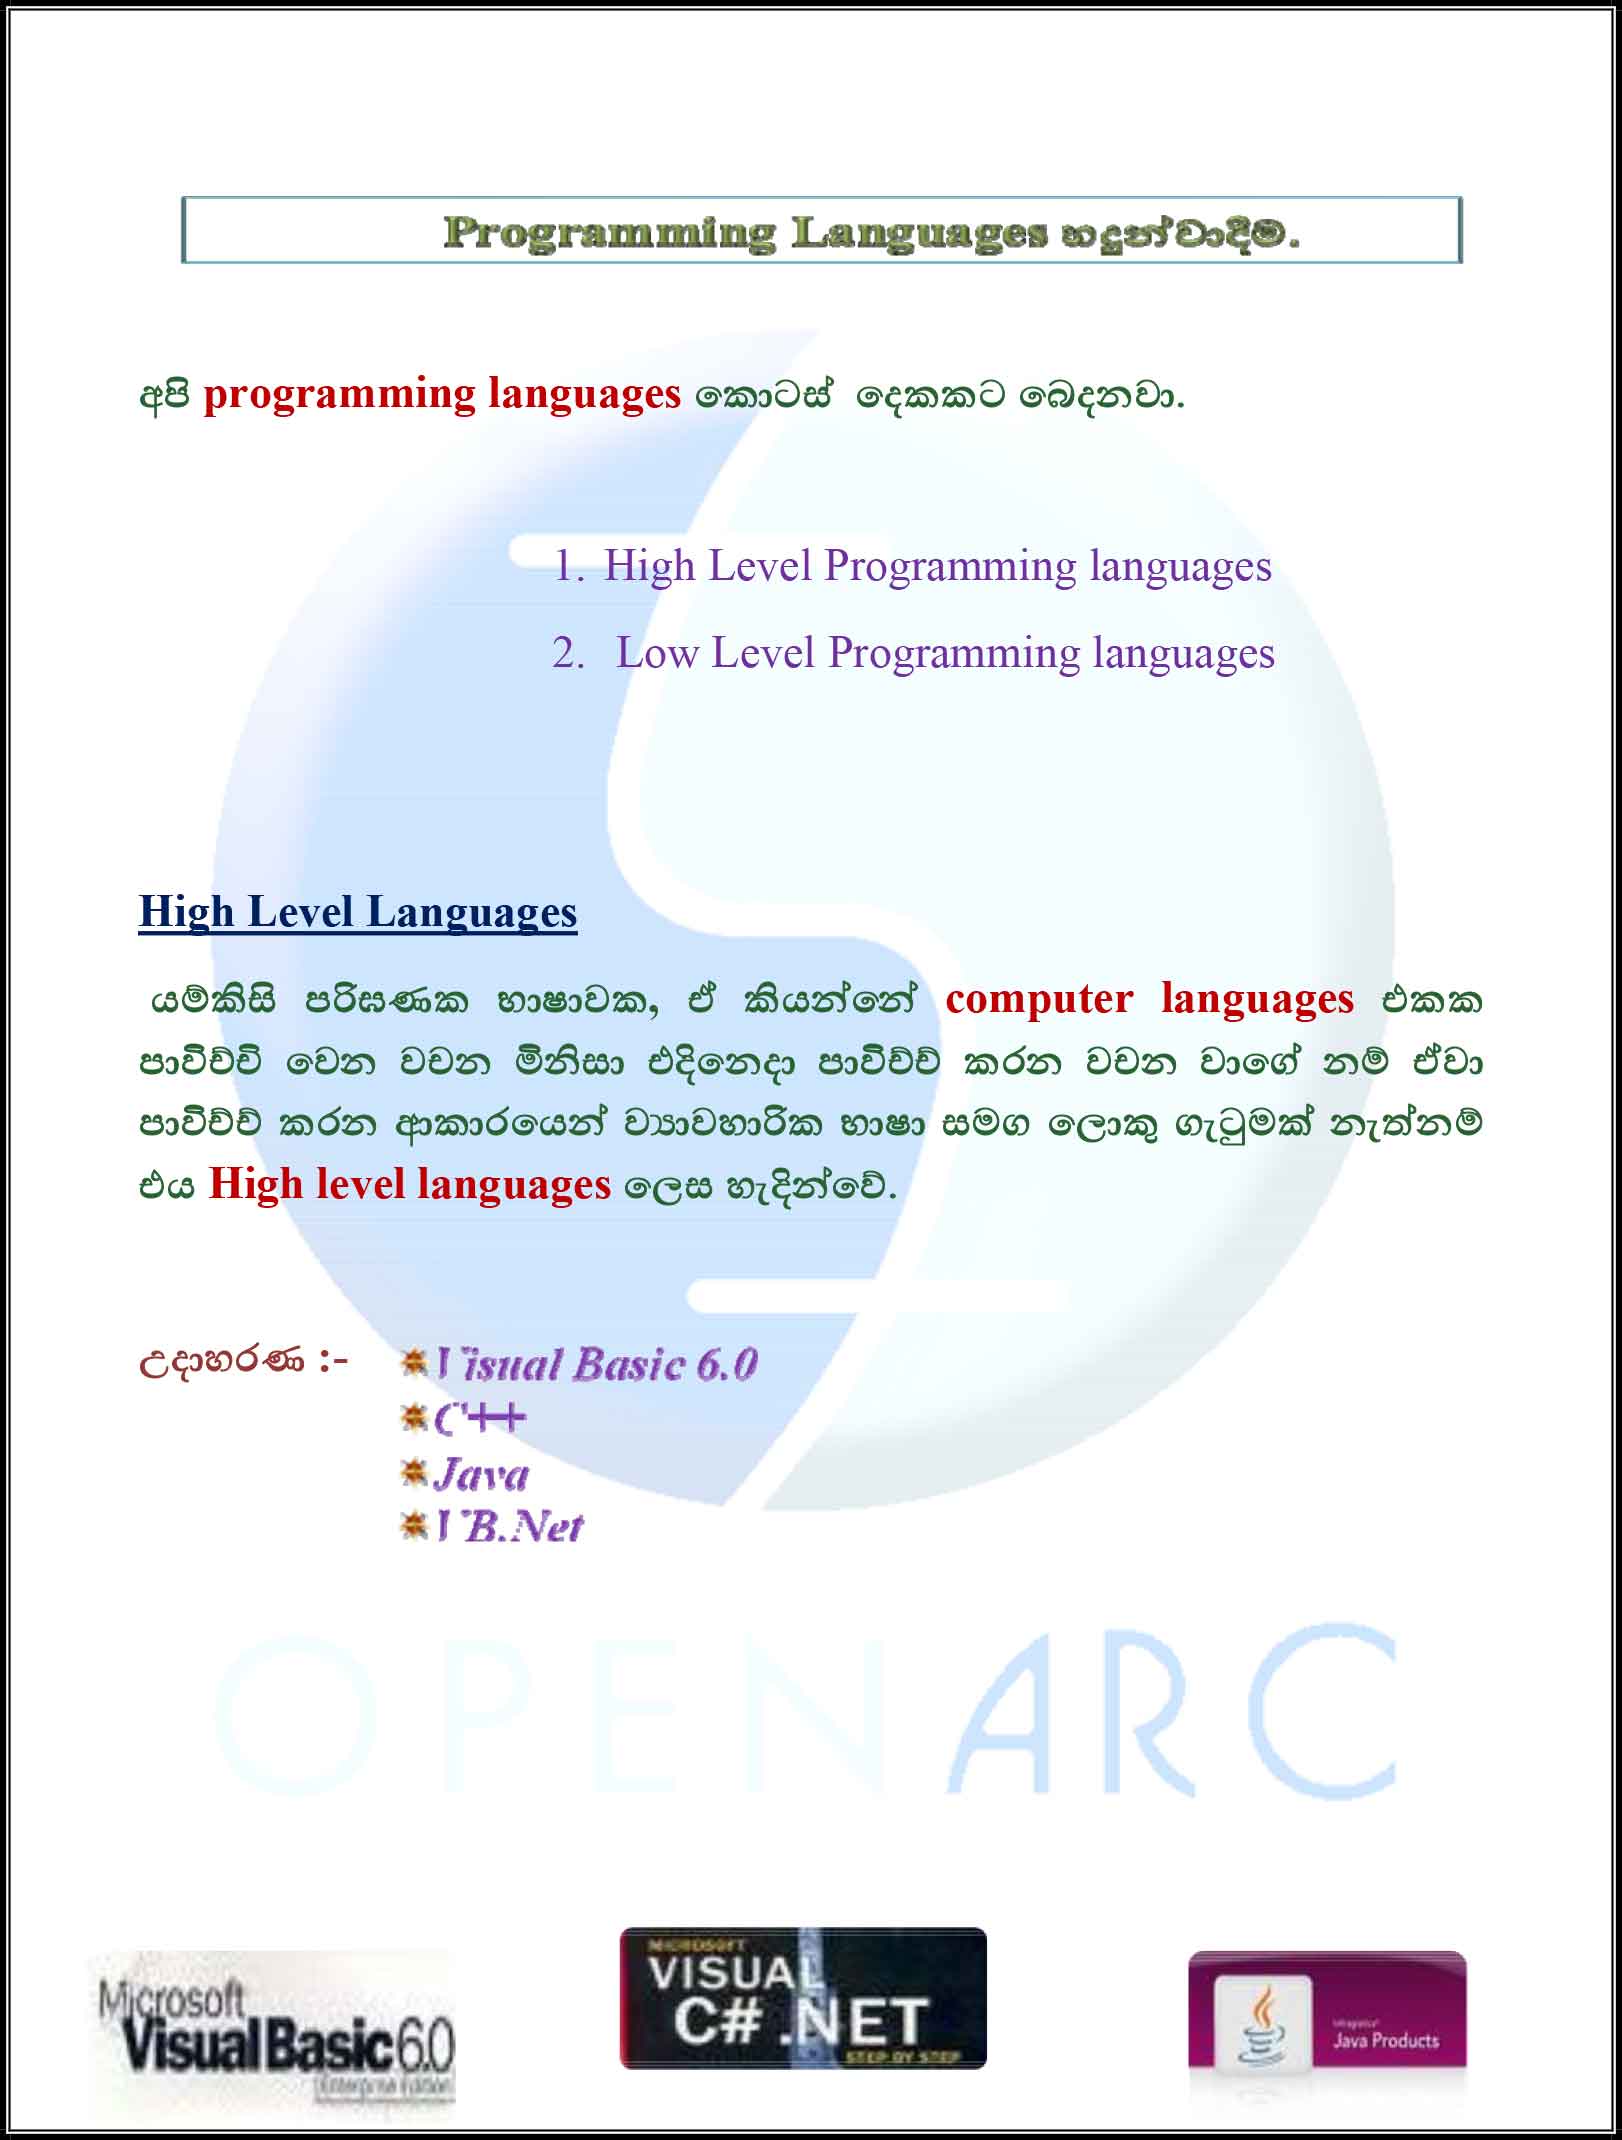 Introduction to Programming Languages in Sinhala